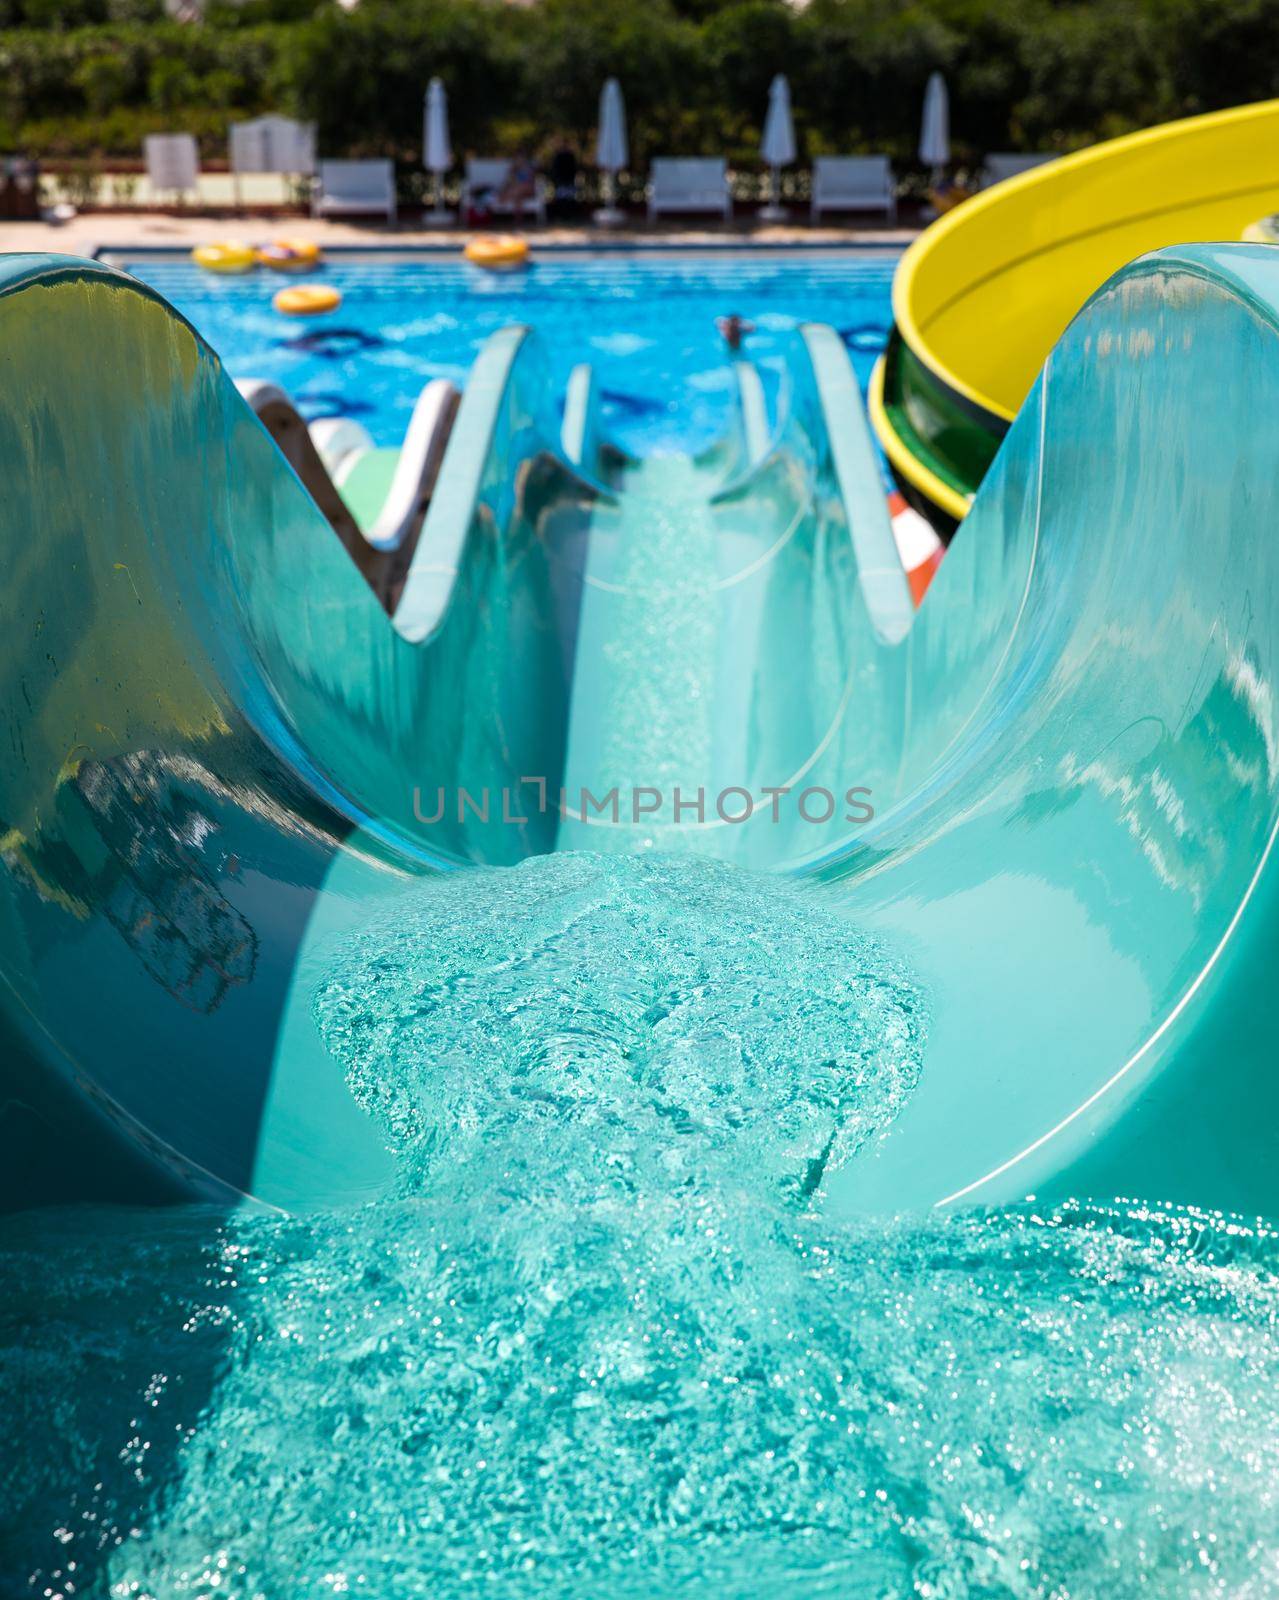 Colorful waterpark tubes and a swimming pool. Outdoor shot